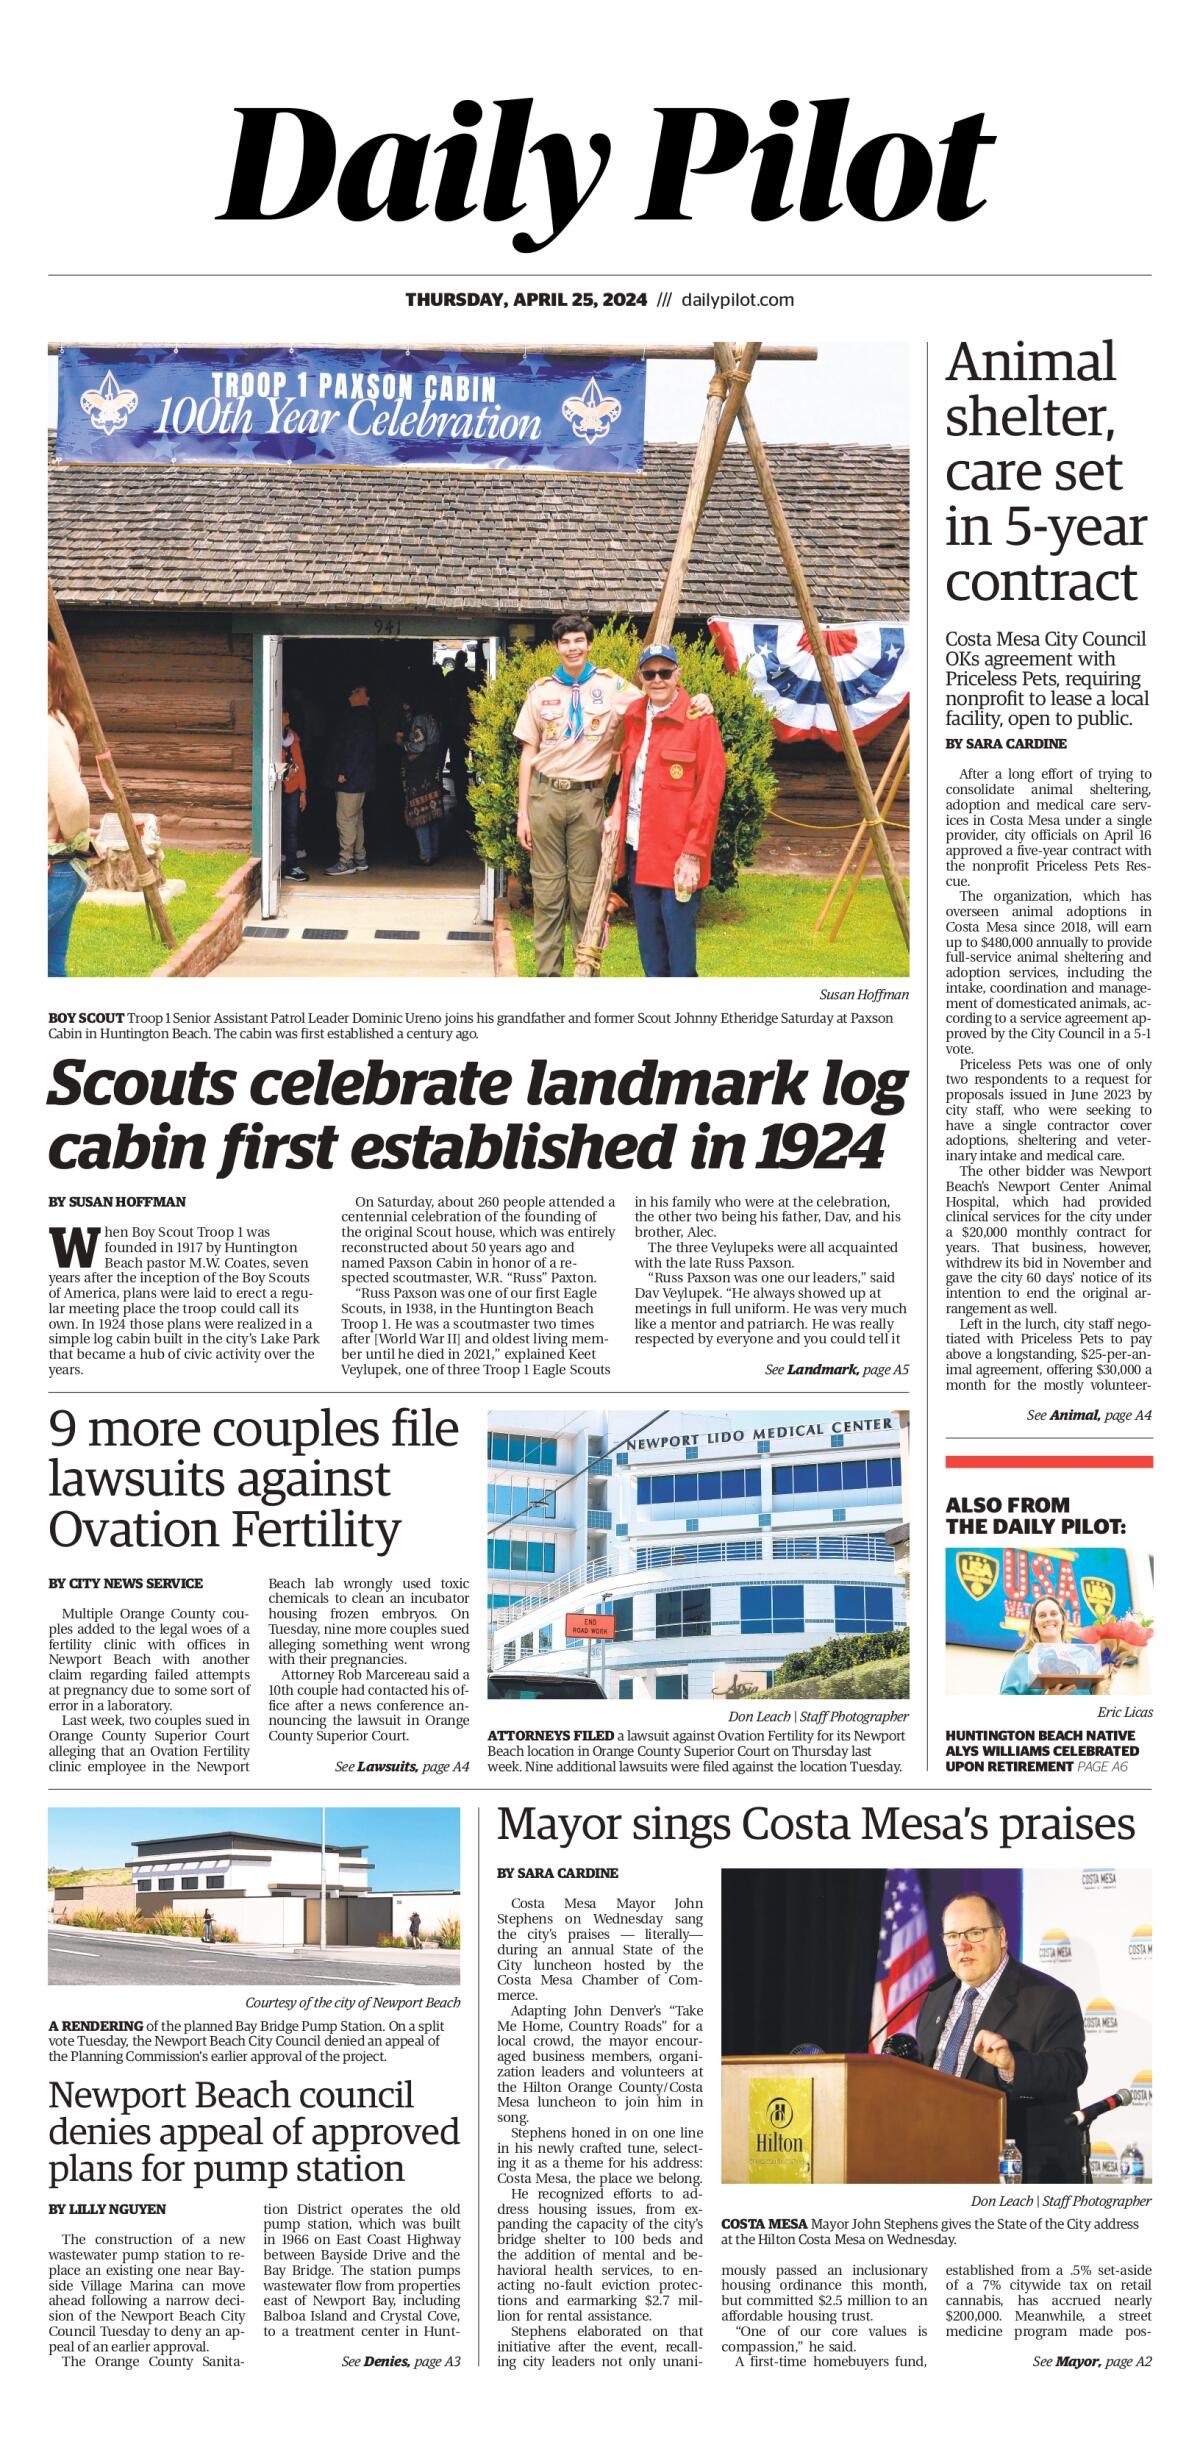 Front page of the Daily Pilot e-newspaper for April 25, 2024.